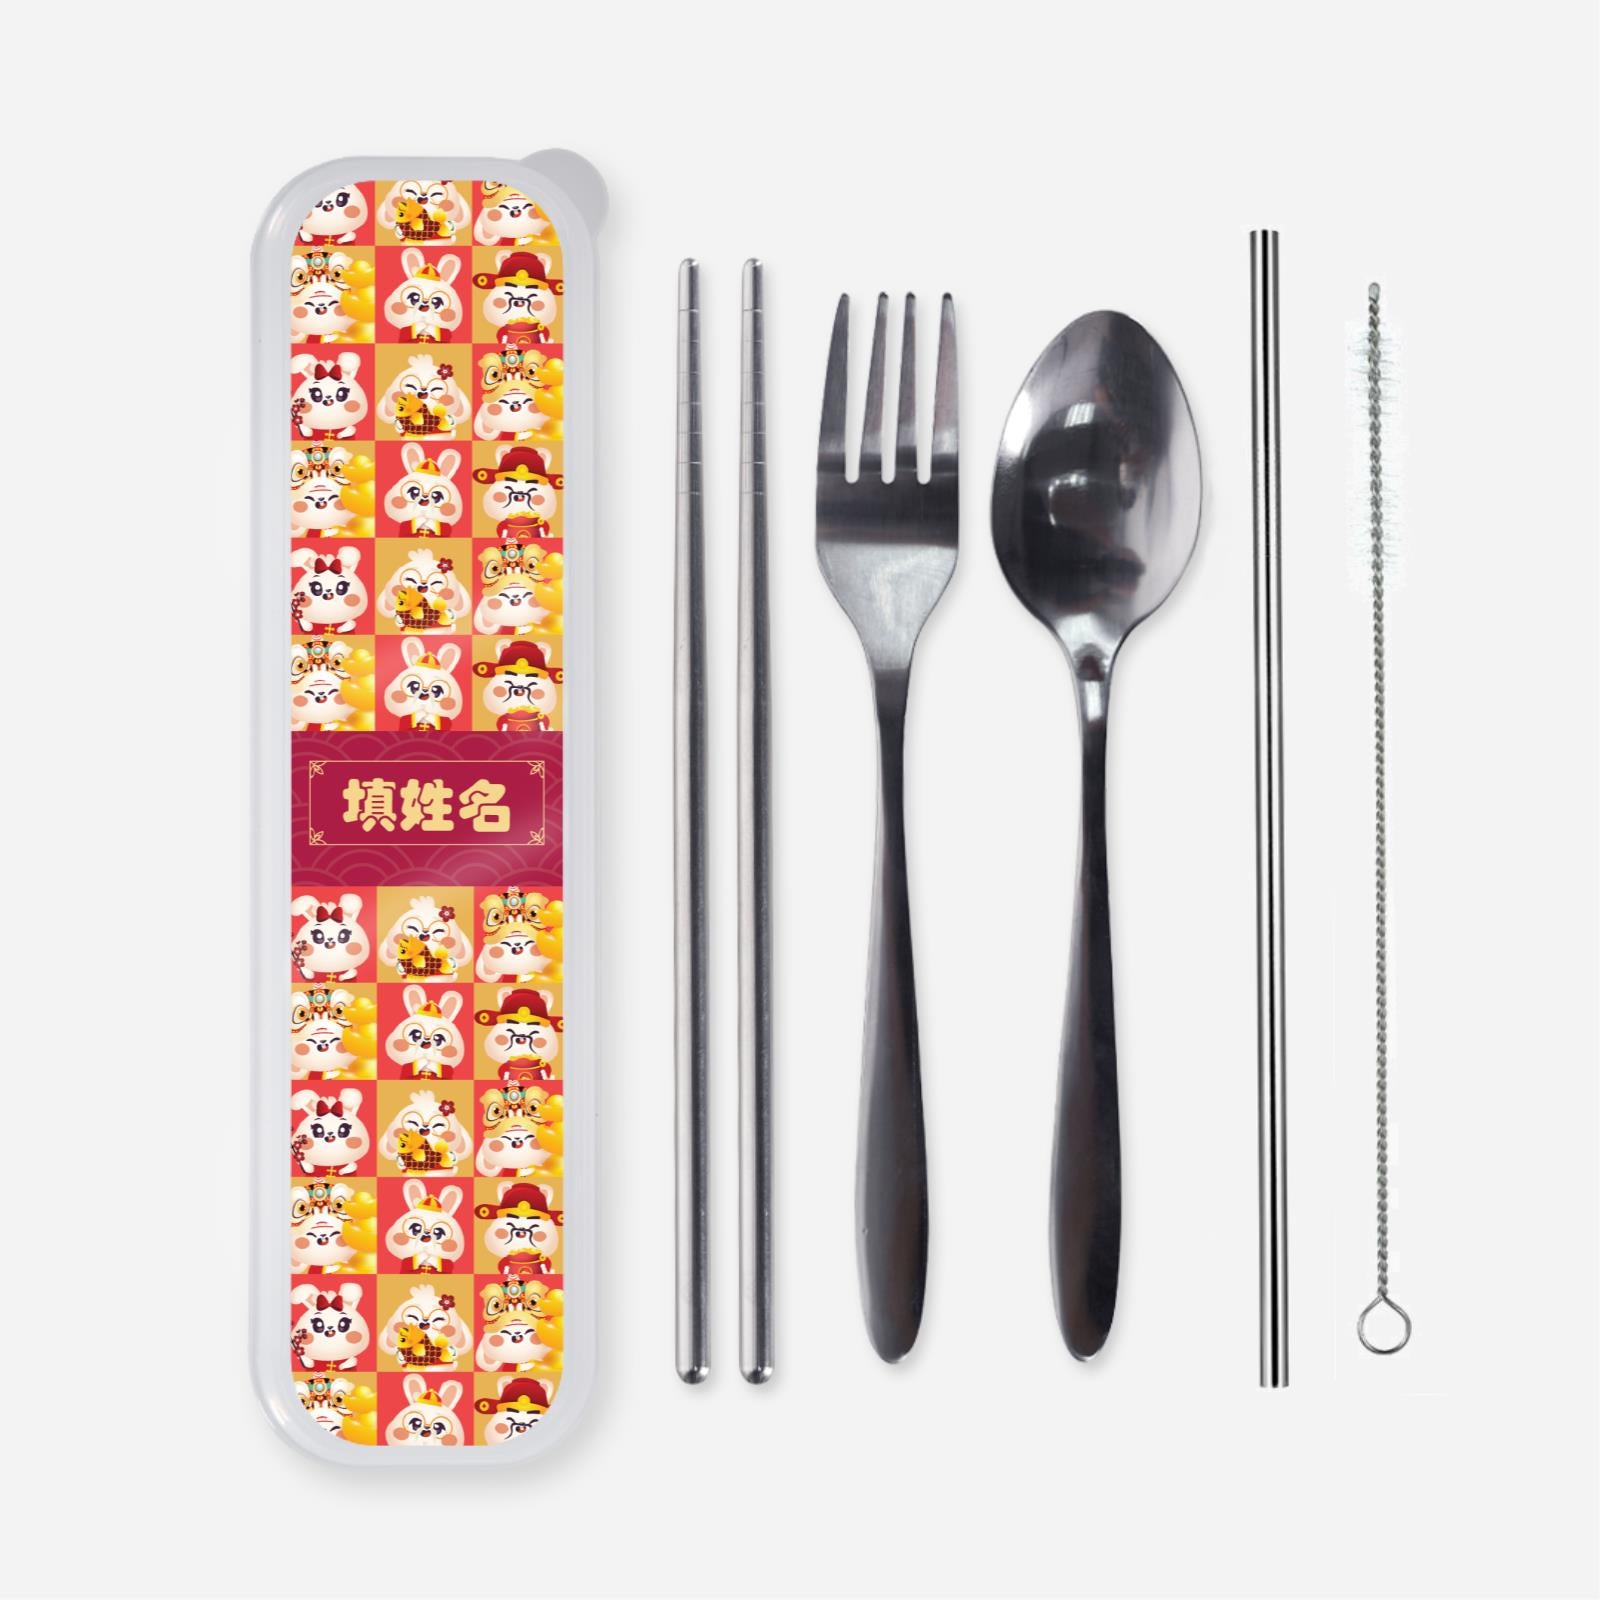 Cny Rabbit Family - Rabbit Family Red Cutlery With Chinese Personalization